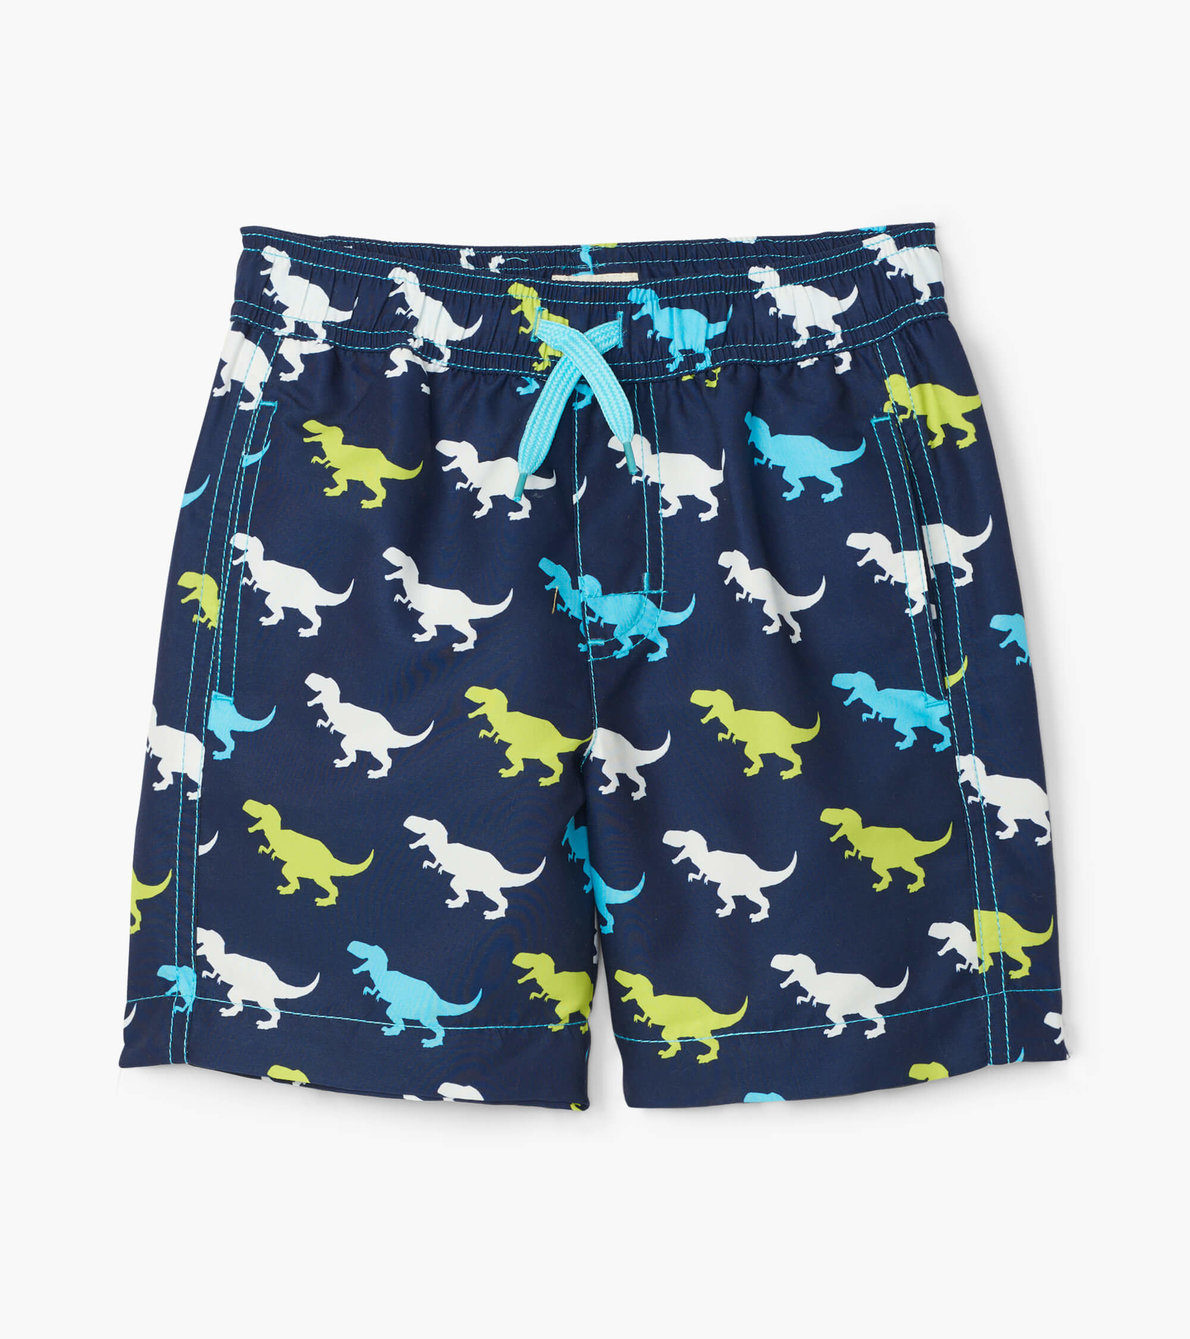 View larger image of T-Rex Silhouettes Swim Trunks